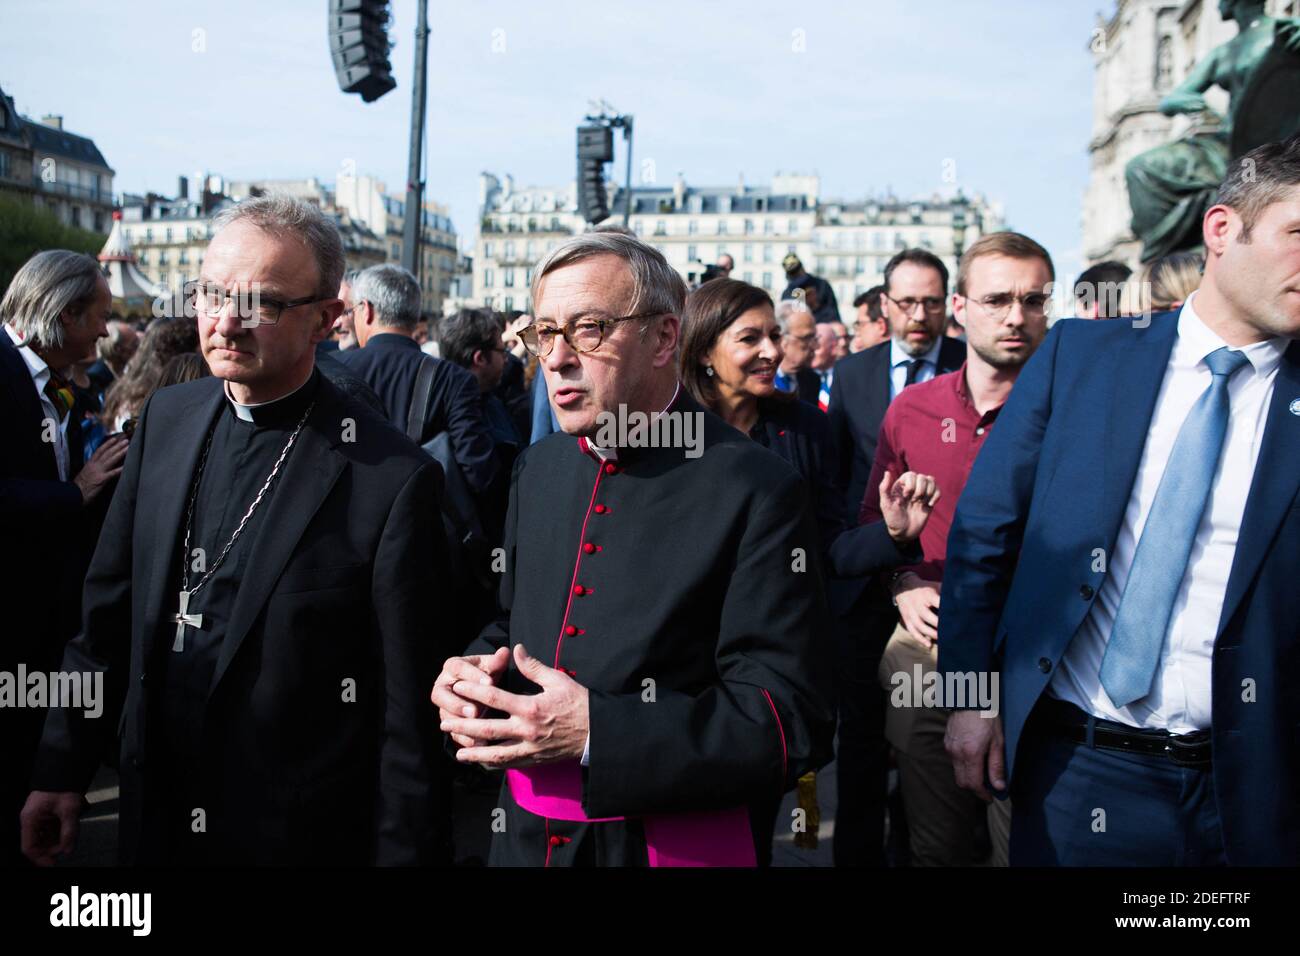 Notre Dame cathedral rector Jean-Marc Chauvet French Interior Minister Christophe Castaner, Paris prefect Didier Lallement, Paris mayor Anne Hidalgo, and other officials walk by Notre Dame cathedral on April 18, 2019 in Paris. France paid a daylong tribute on April 18, 2019 to the Paris firefighters who saved Notre Dame Cathedral from collapse, while construction workers rushed to secure an area above one of the church's famed rose-shaped windows and other vulnerable sections of the fire-damaged landmark. Photo by Raphael Lafargue/ABACAPRESS.COM Stock Photo